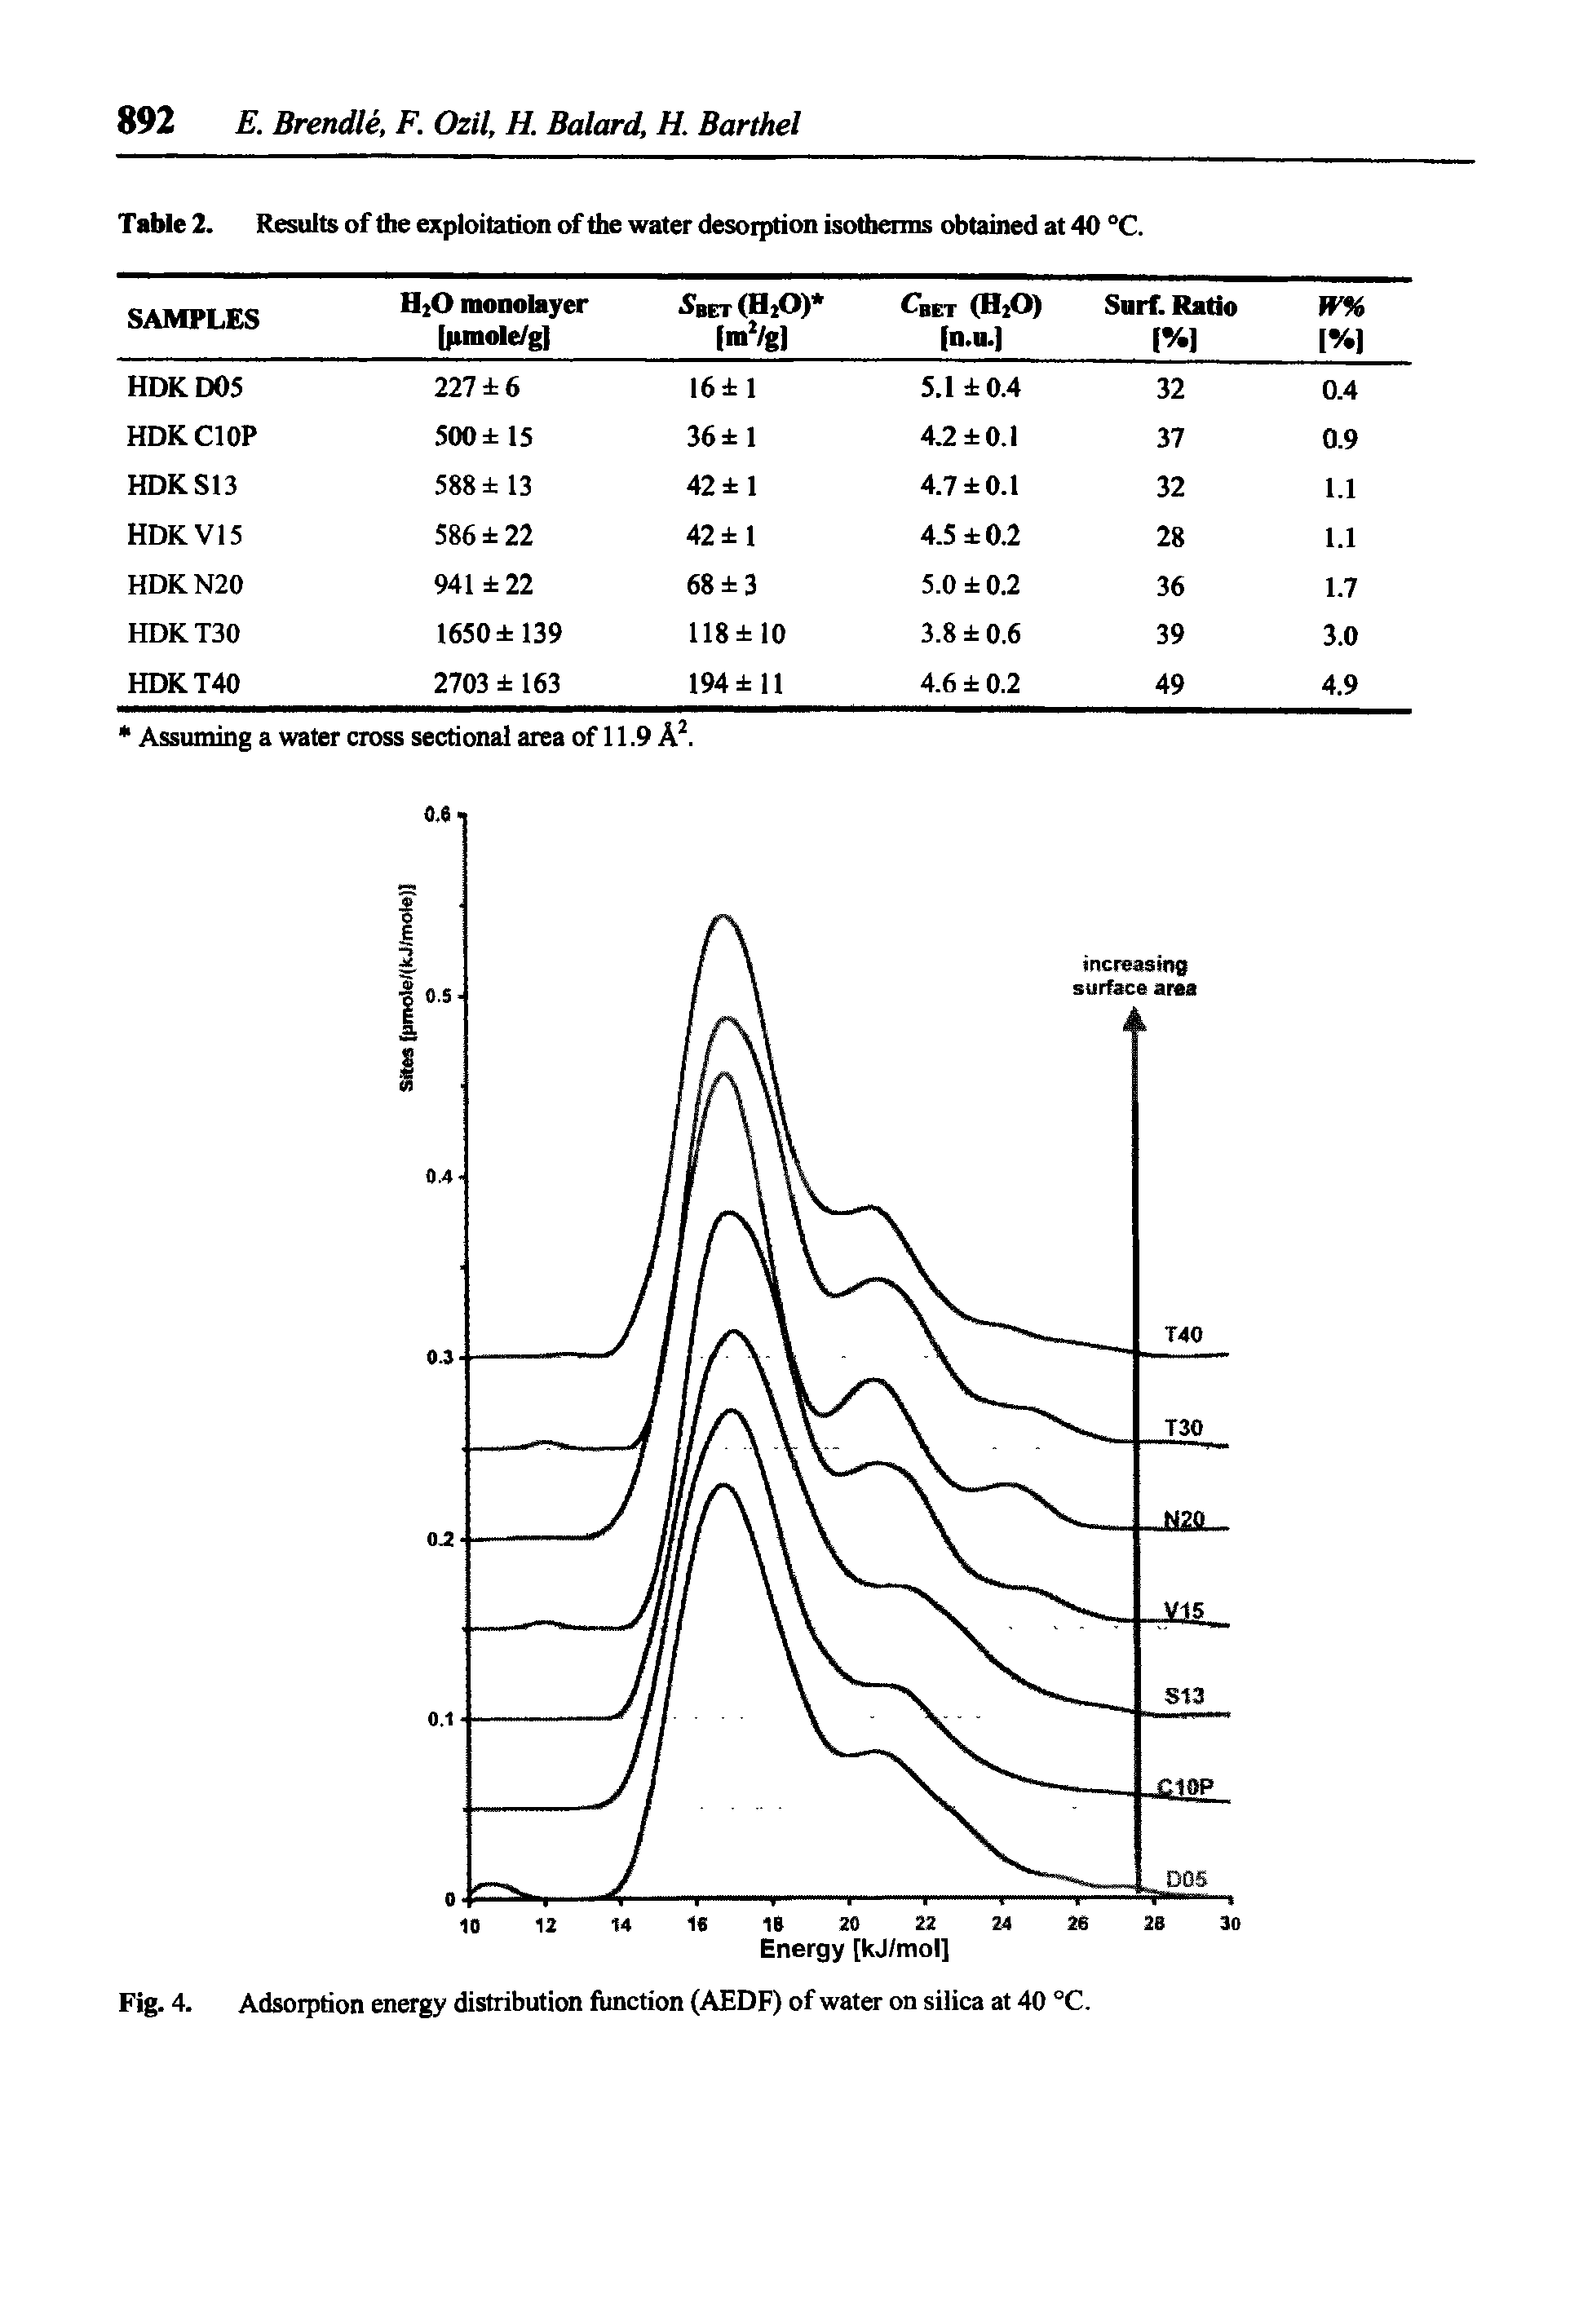 Table 2. Results of the exploitation of the water desorption isotherms obtained at 40 °C.